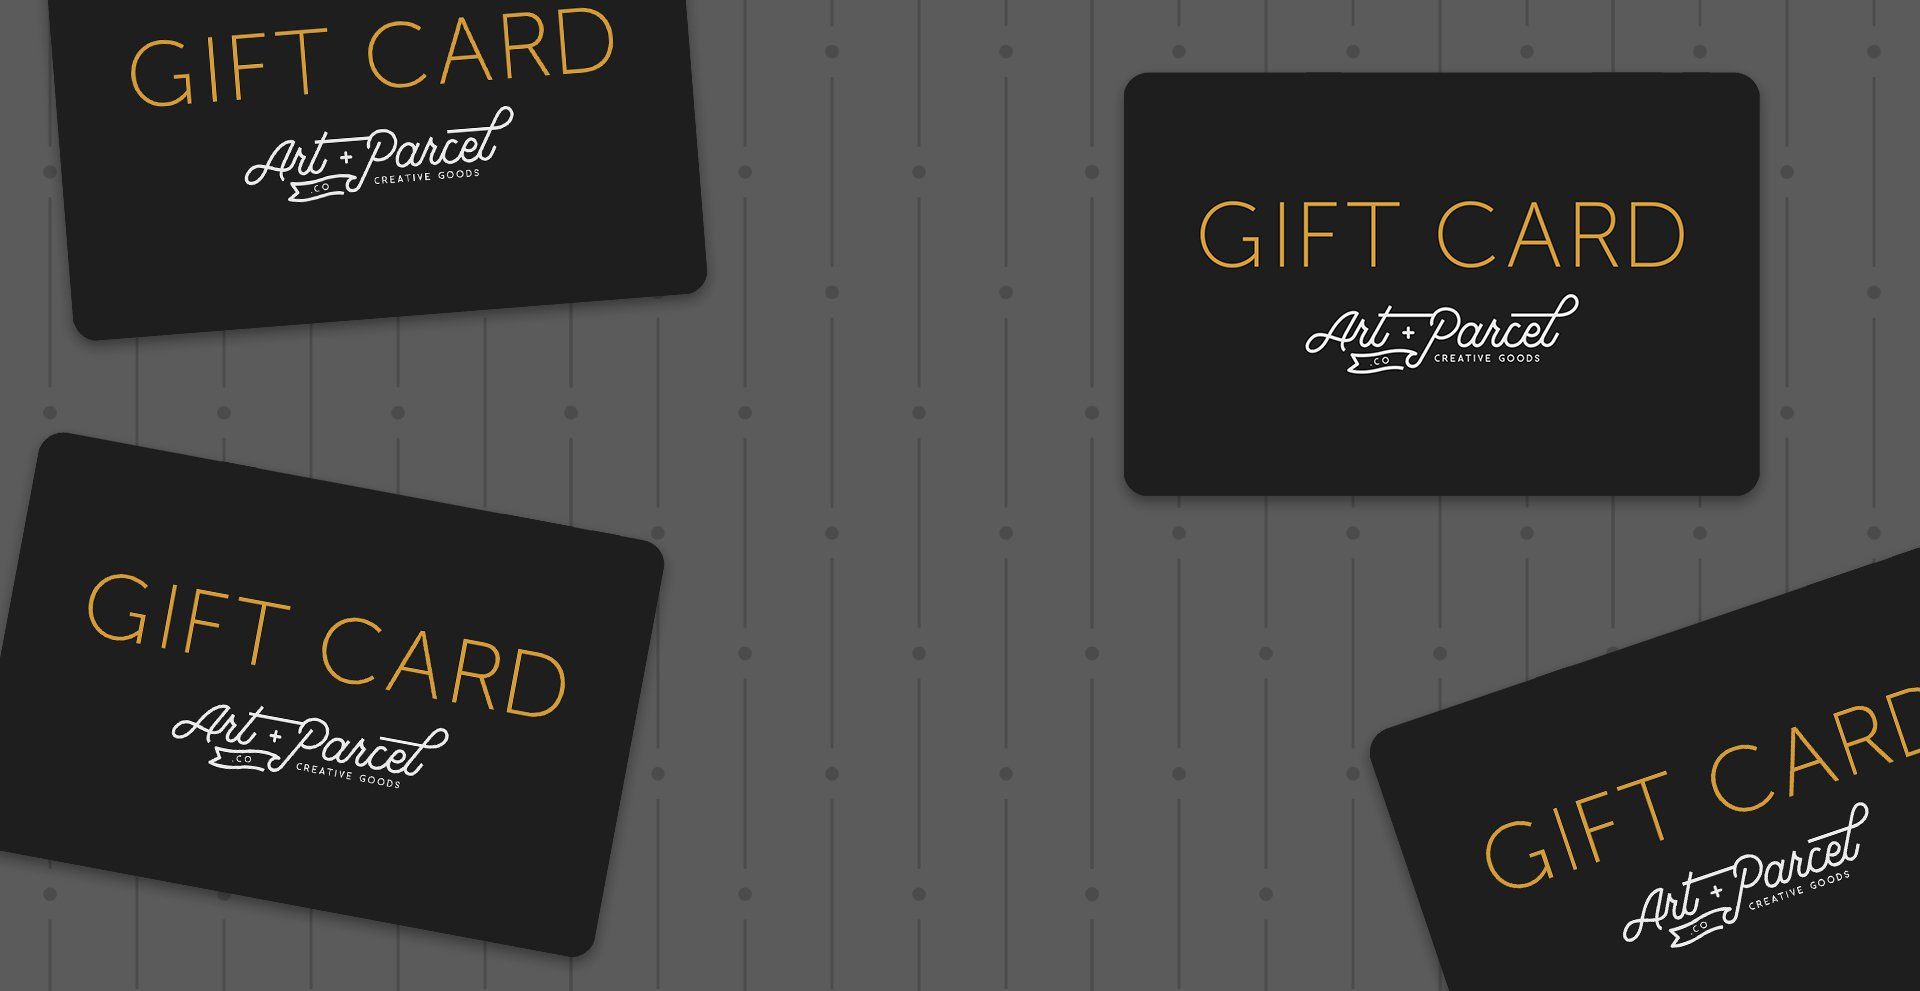 Gift Cards are a perfect gift for all occasions